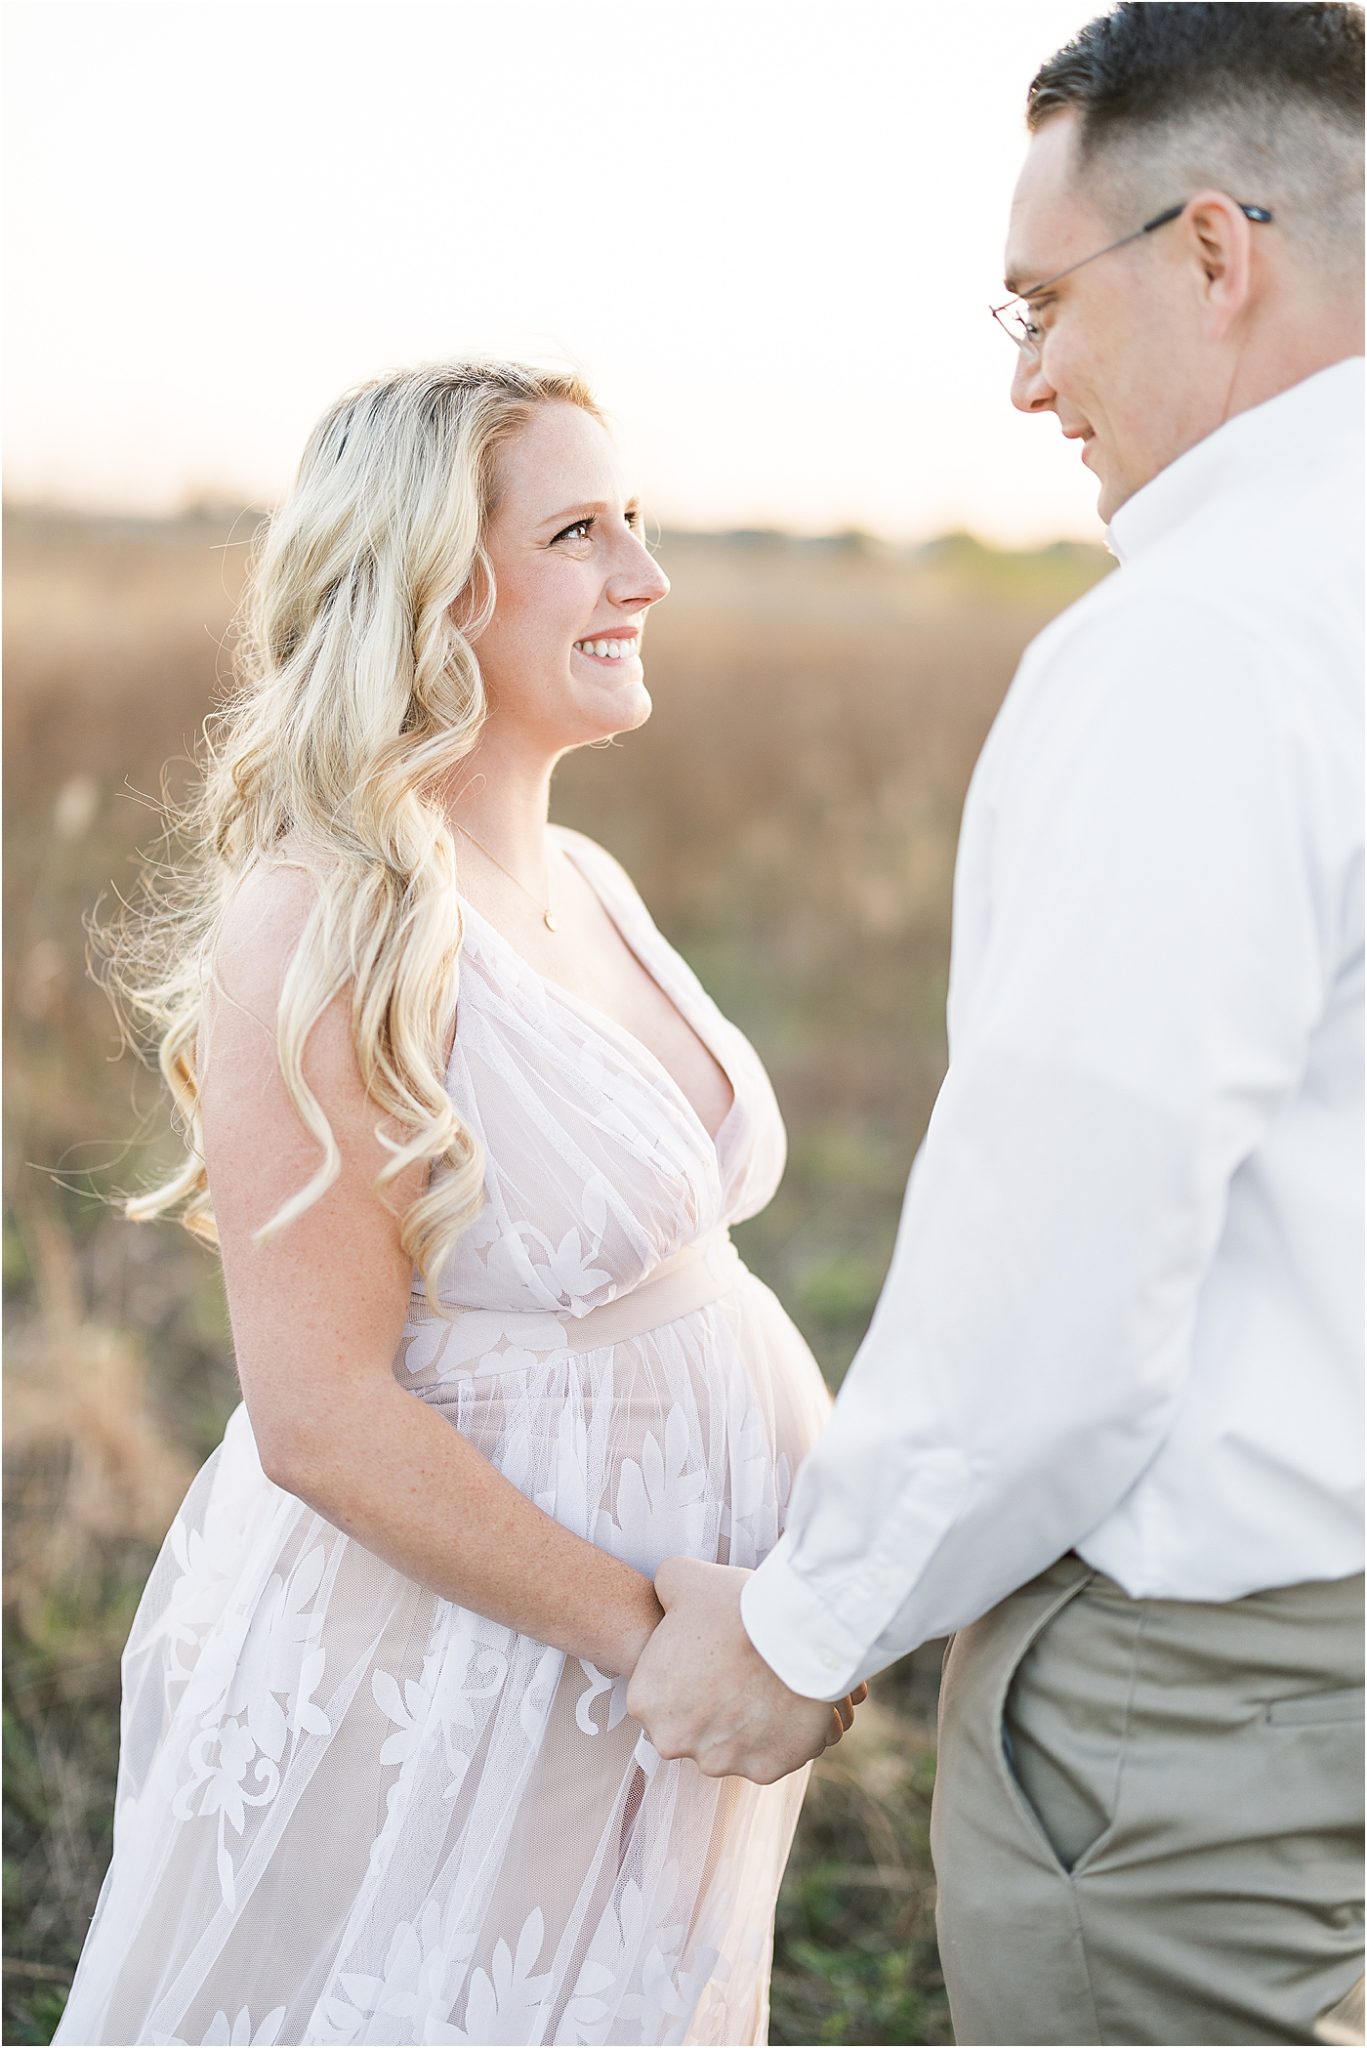 Maternity session at Flat Fork Creek Park in Fishers, IN | Lindsay Konopa Photography